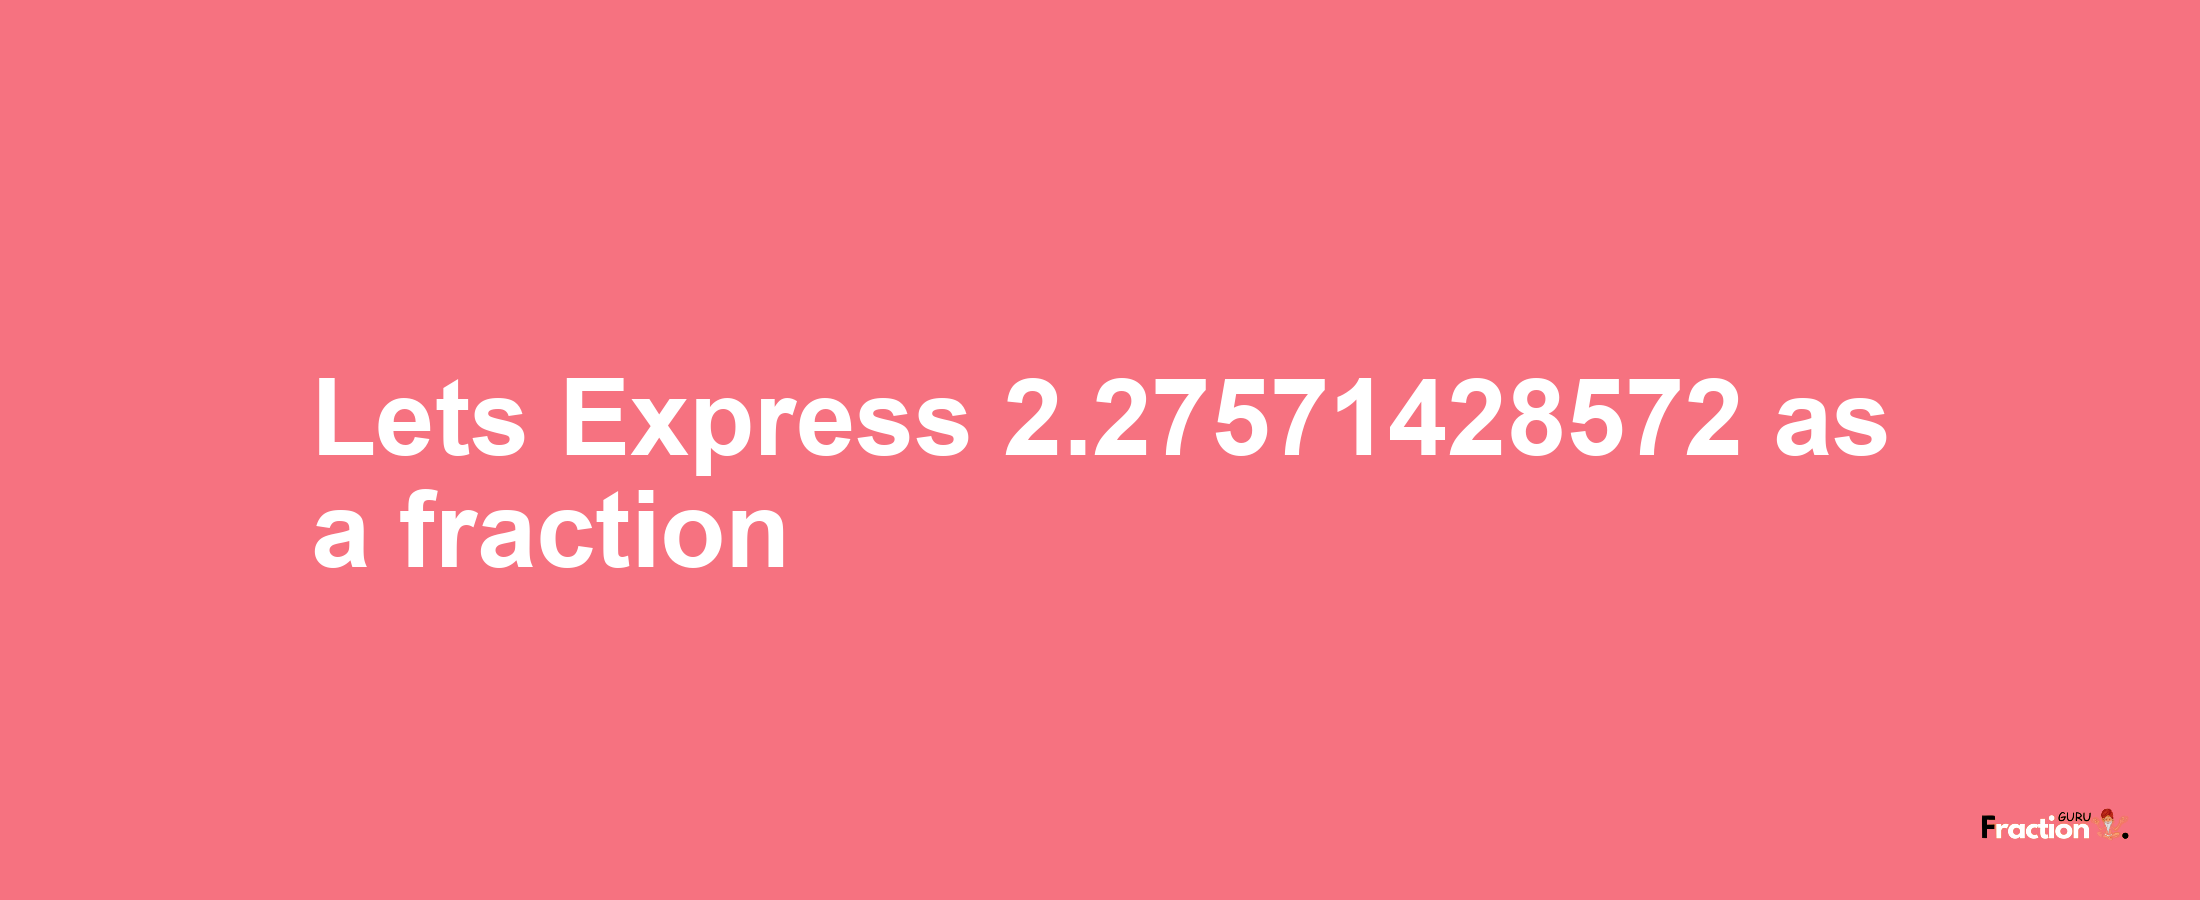 Lets Express 2.27571428572 as afraction